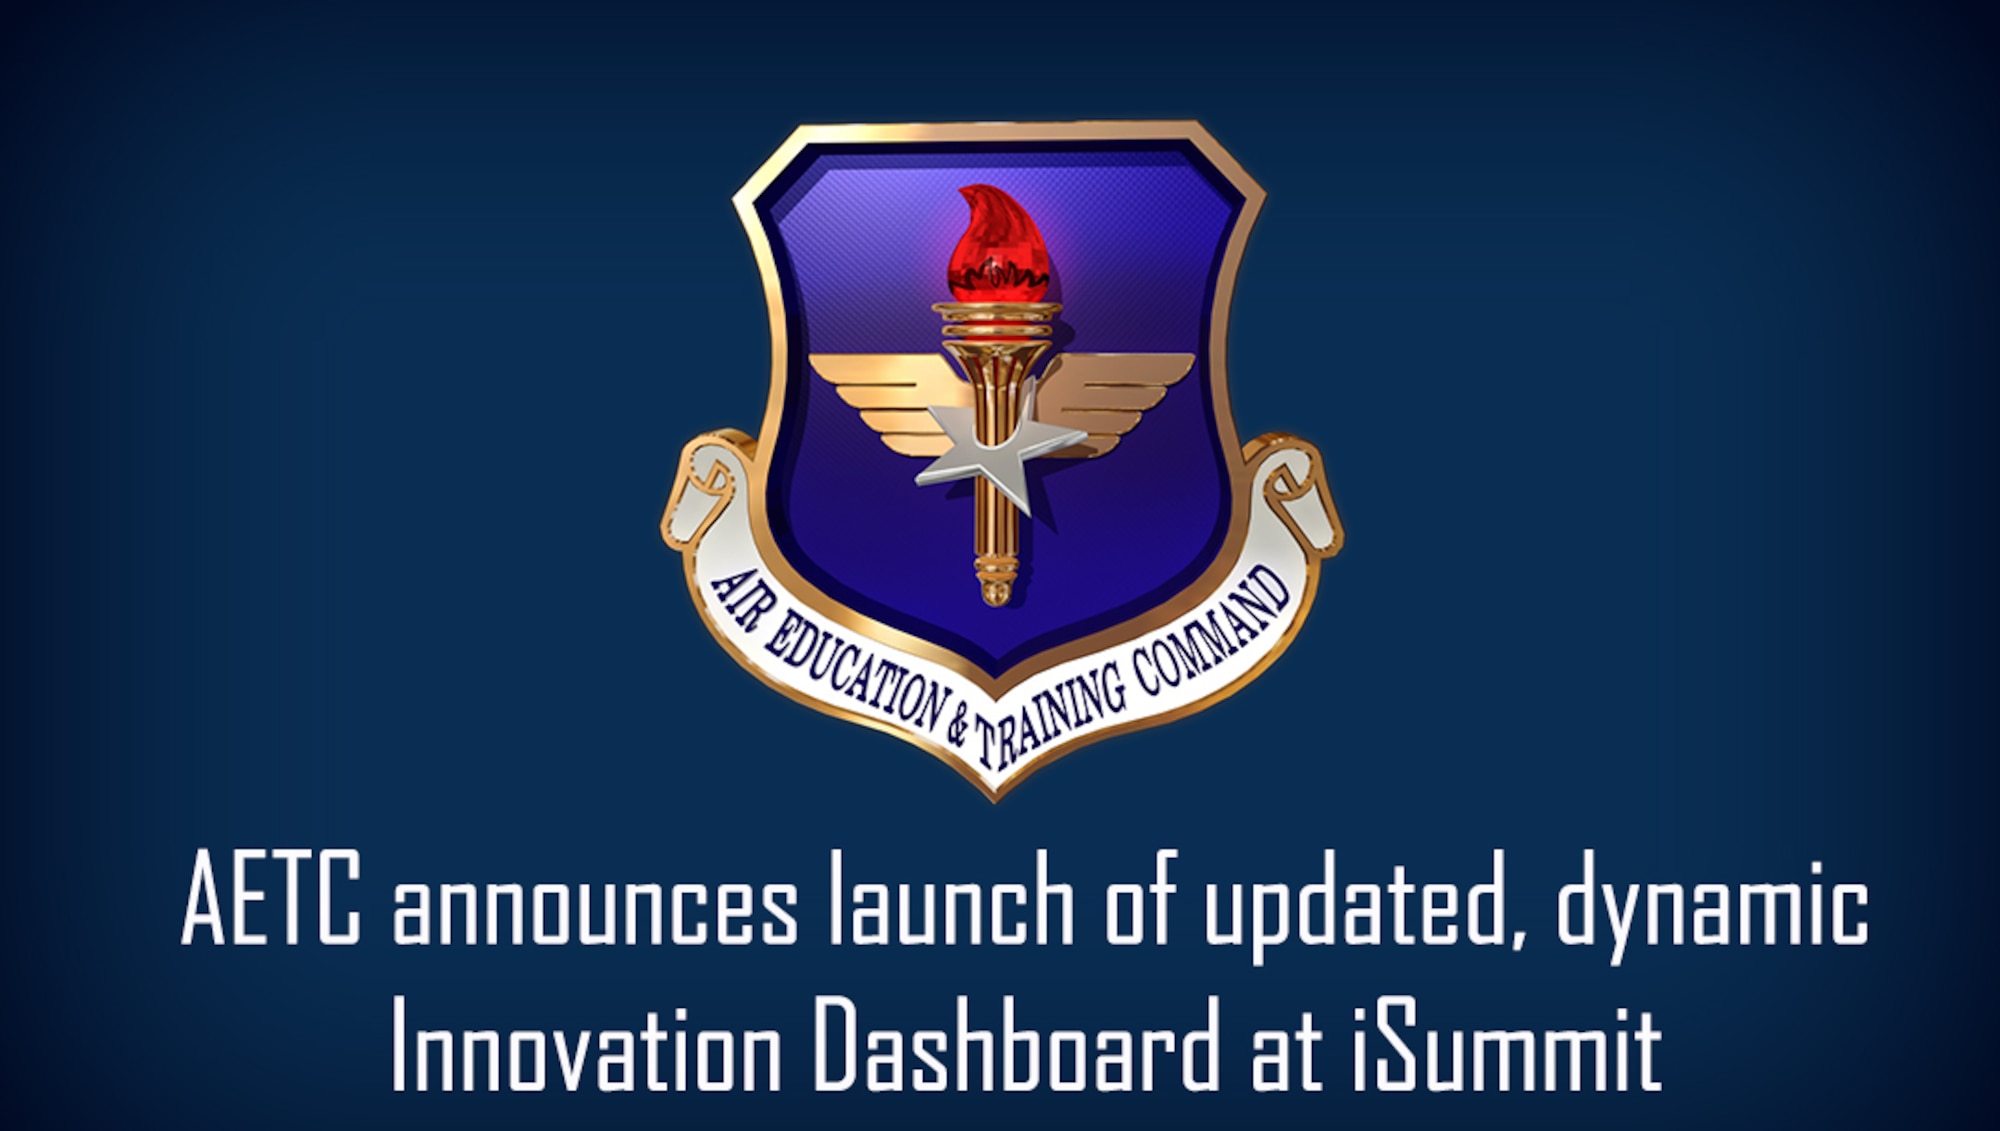 AETC announces launch of updated, dynamic Innovation Dashboard at iSummit